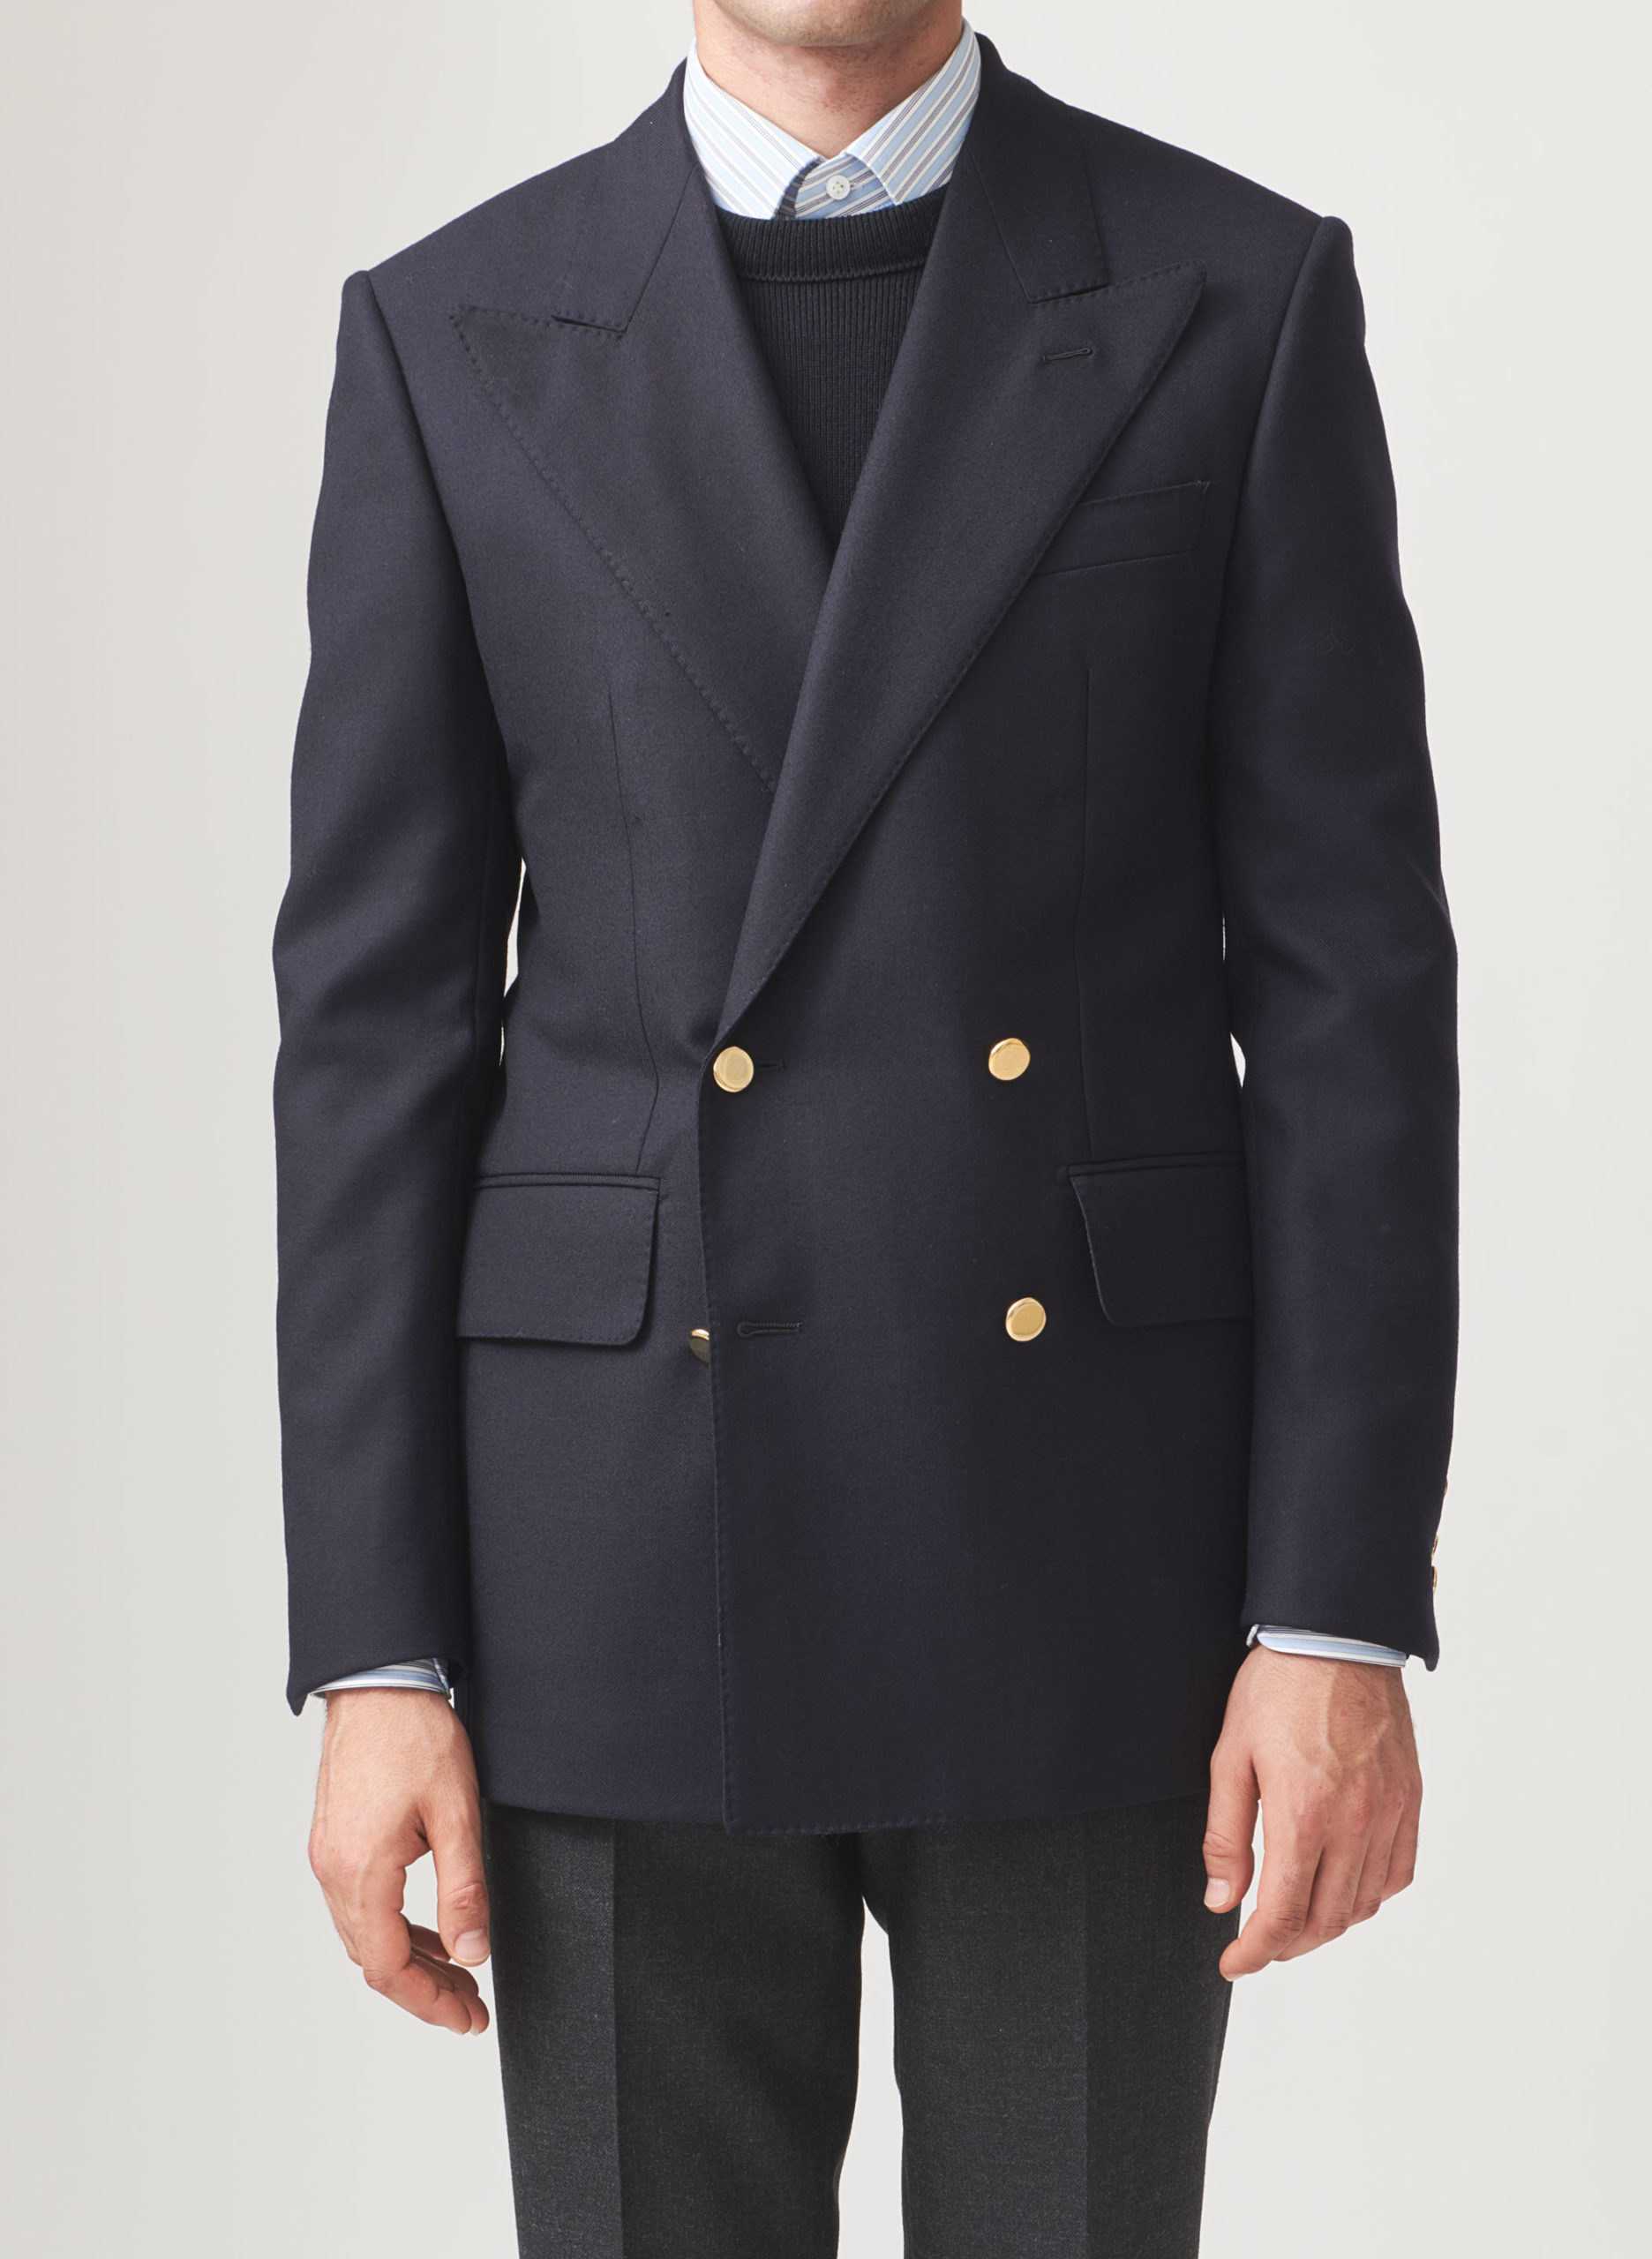 HUSBANDS PARIS : DOUBLE-BREASTED TWILL BLAZER (NAVY BLUE)